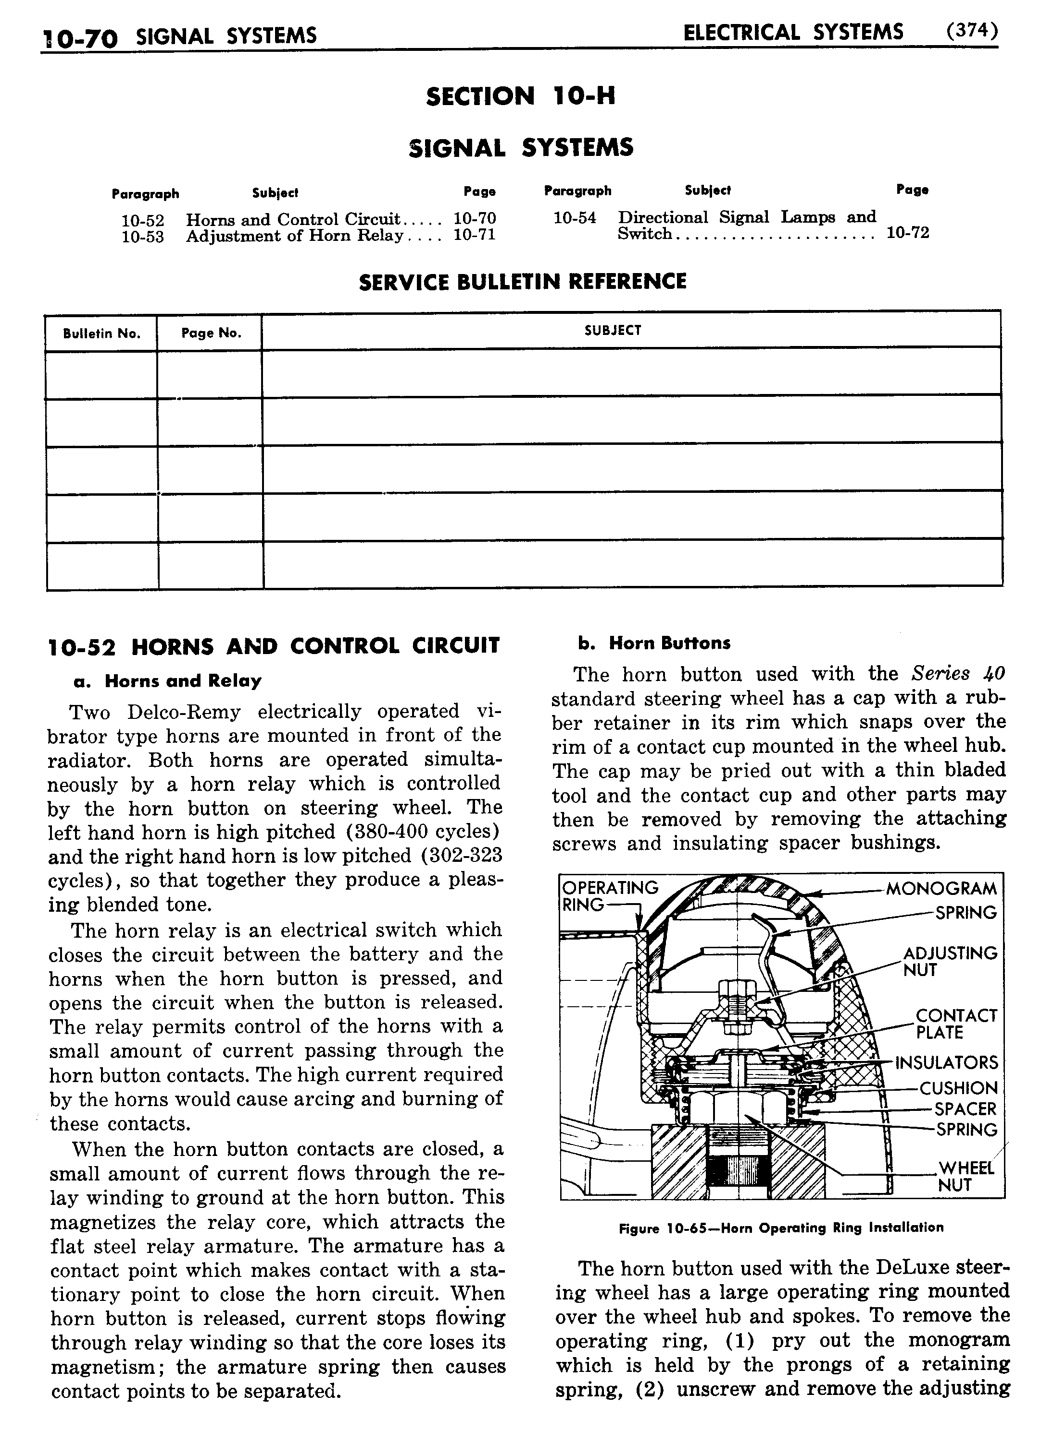 n_11 1955 Buick Shop Manual - Electrical Systems-070-070.jpg